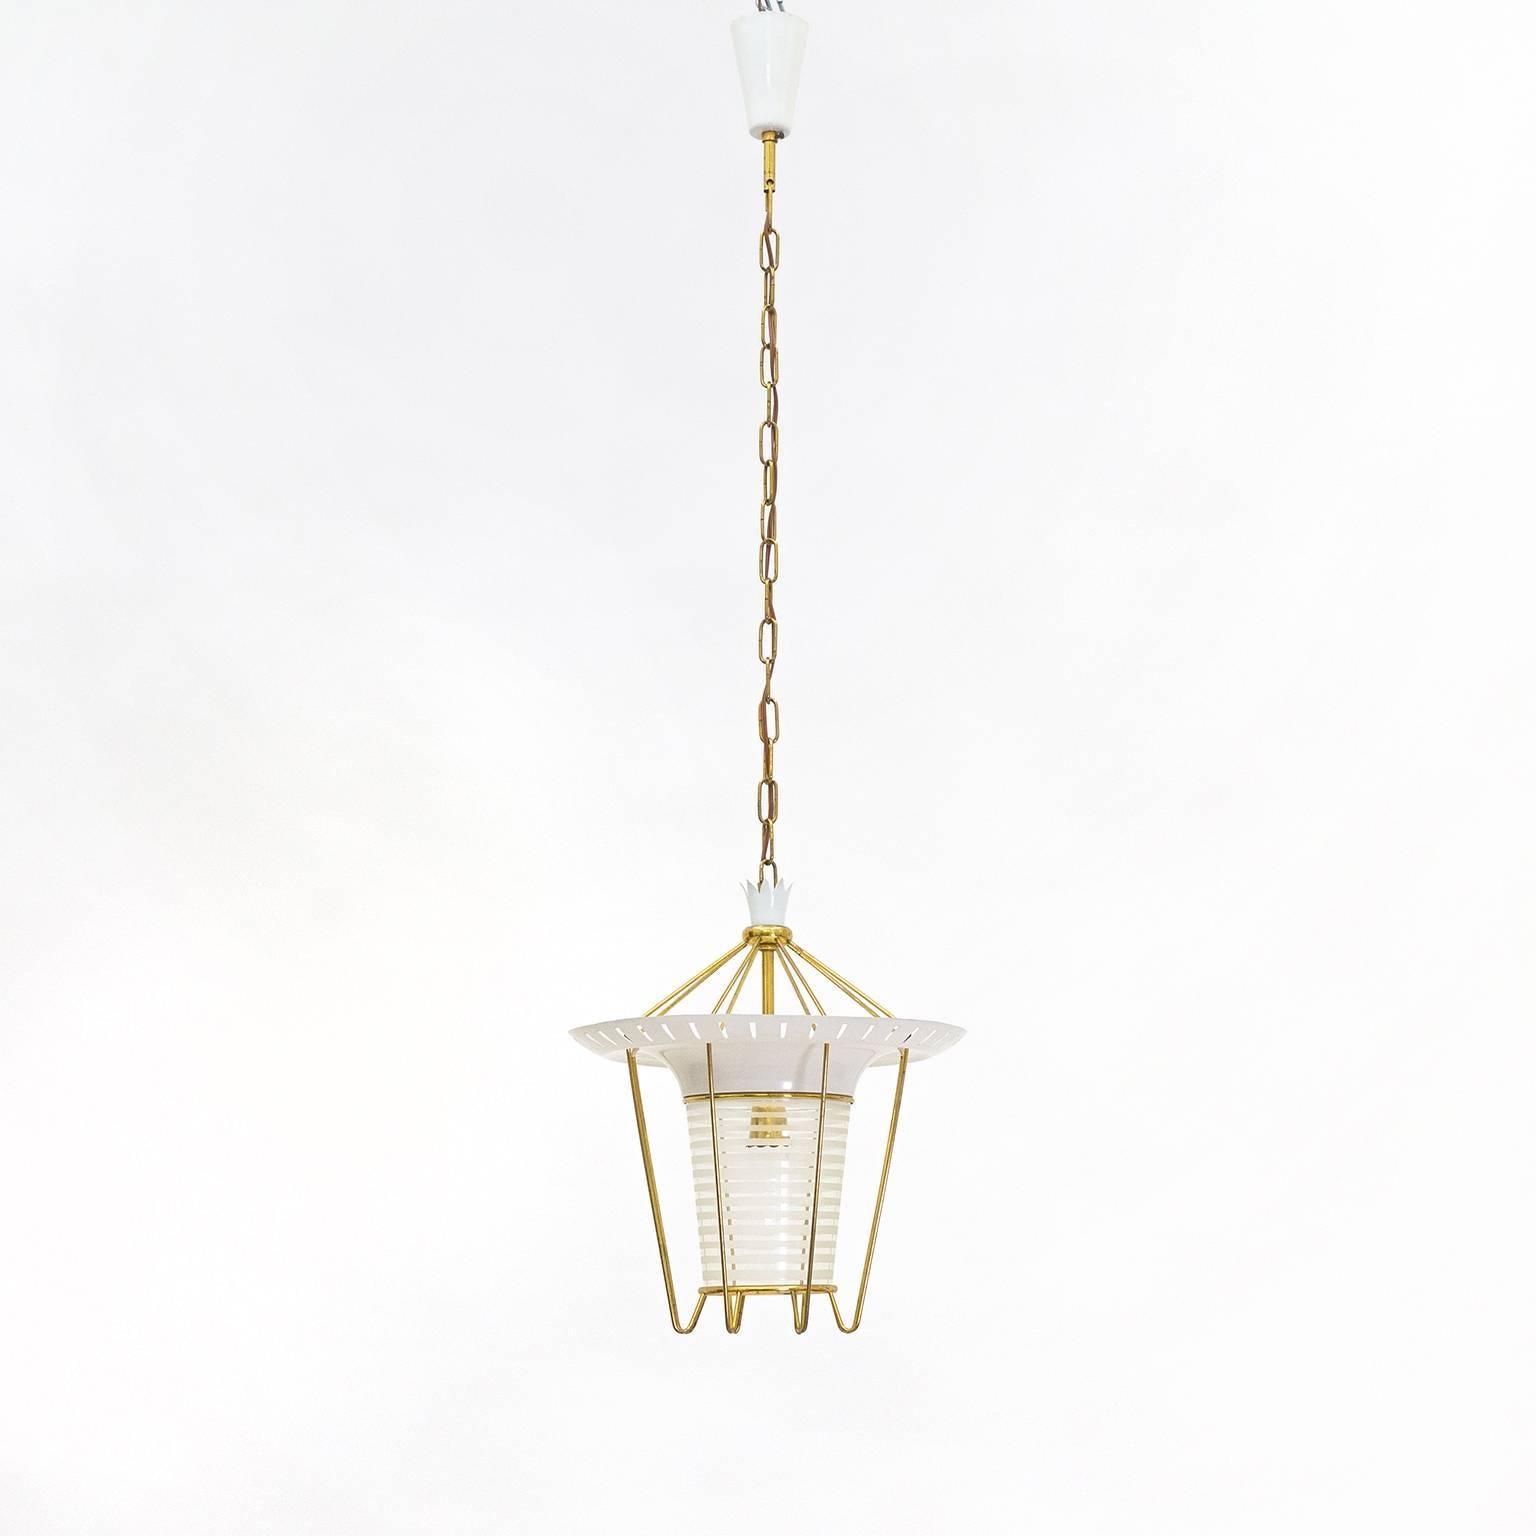 Mid-20th Century Italian 1950s Lantern in Brass, Glass and Lacquered Aluminum